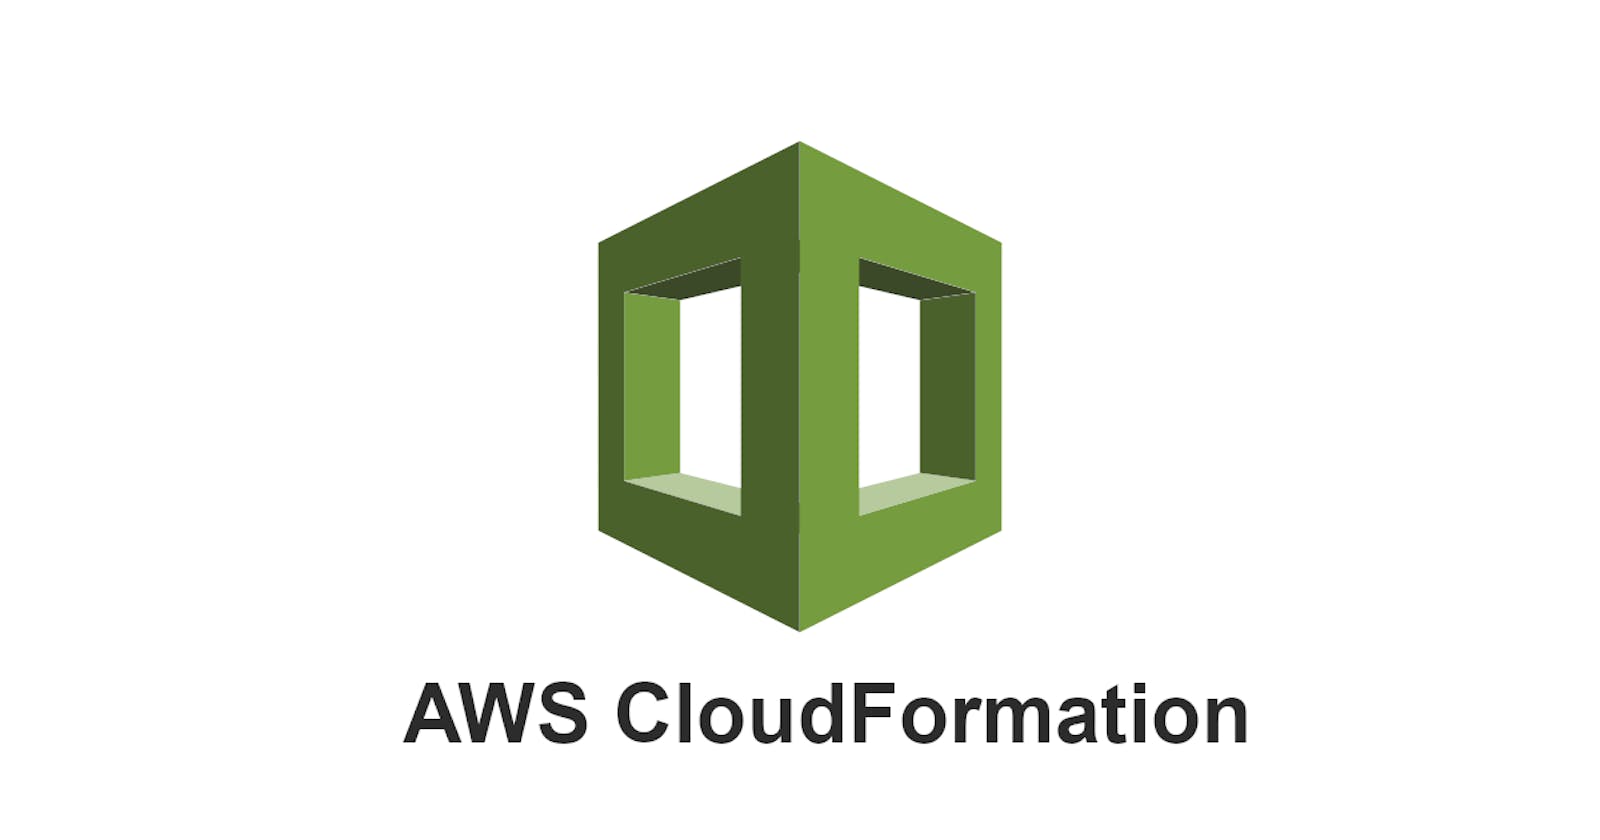 How to launch an EC2 instance with AWS CloudFormation